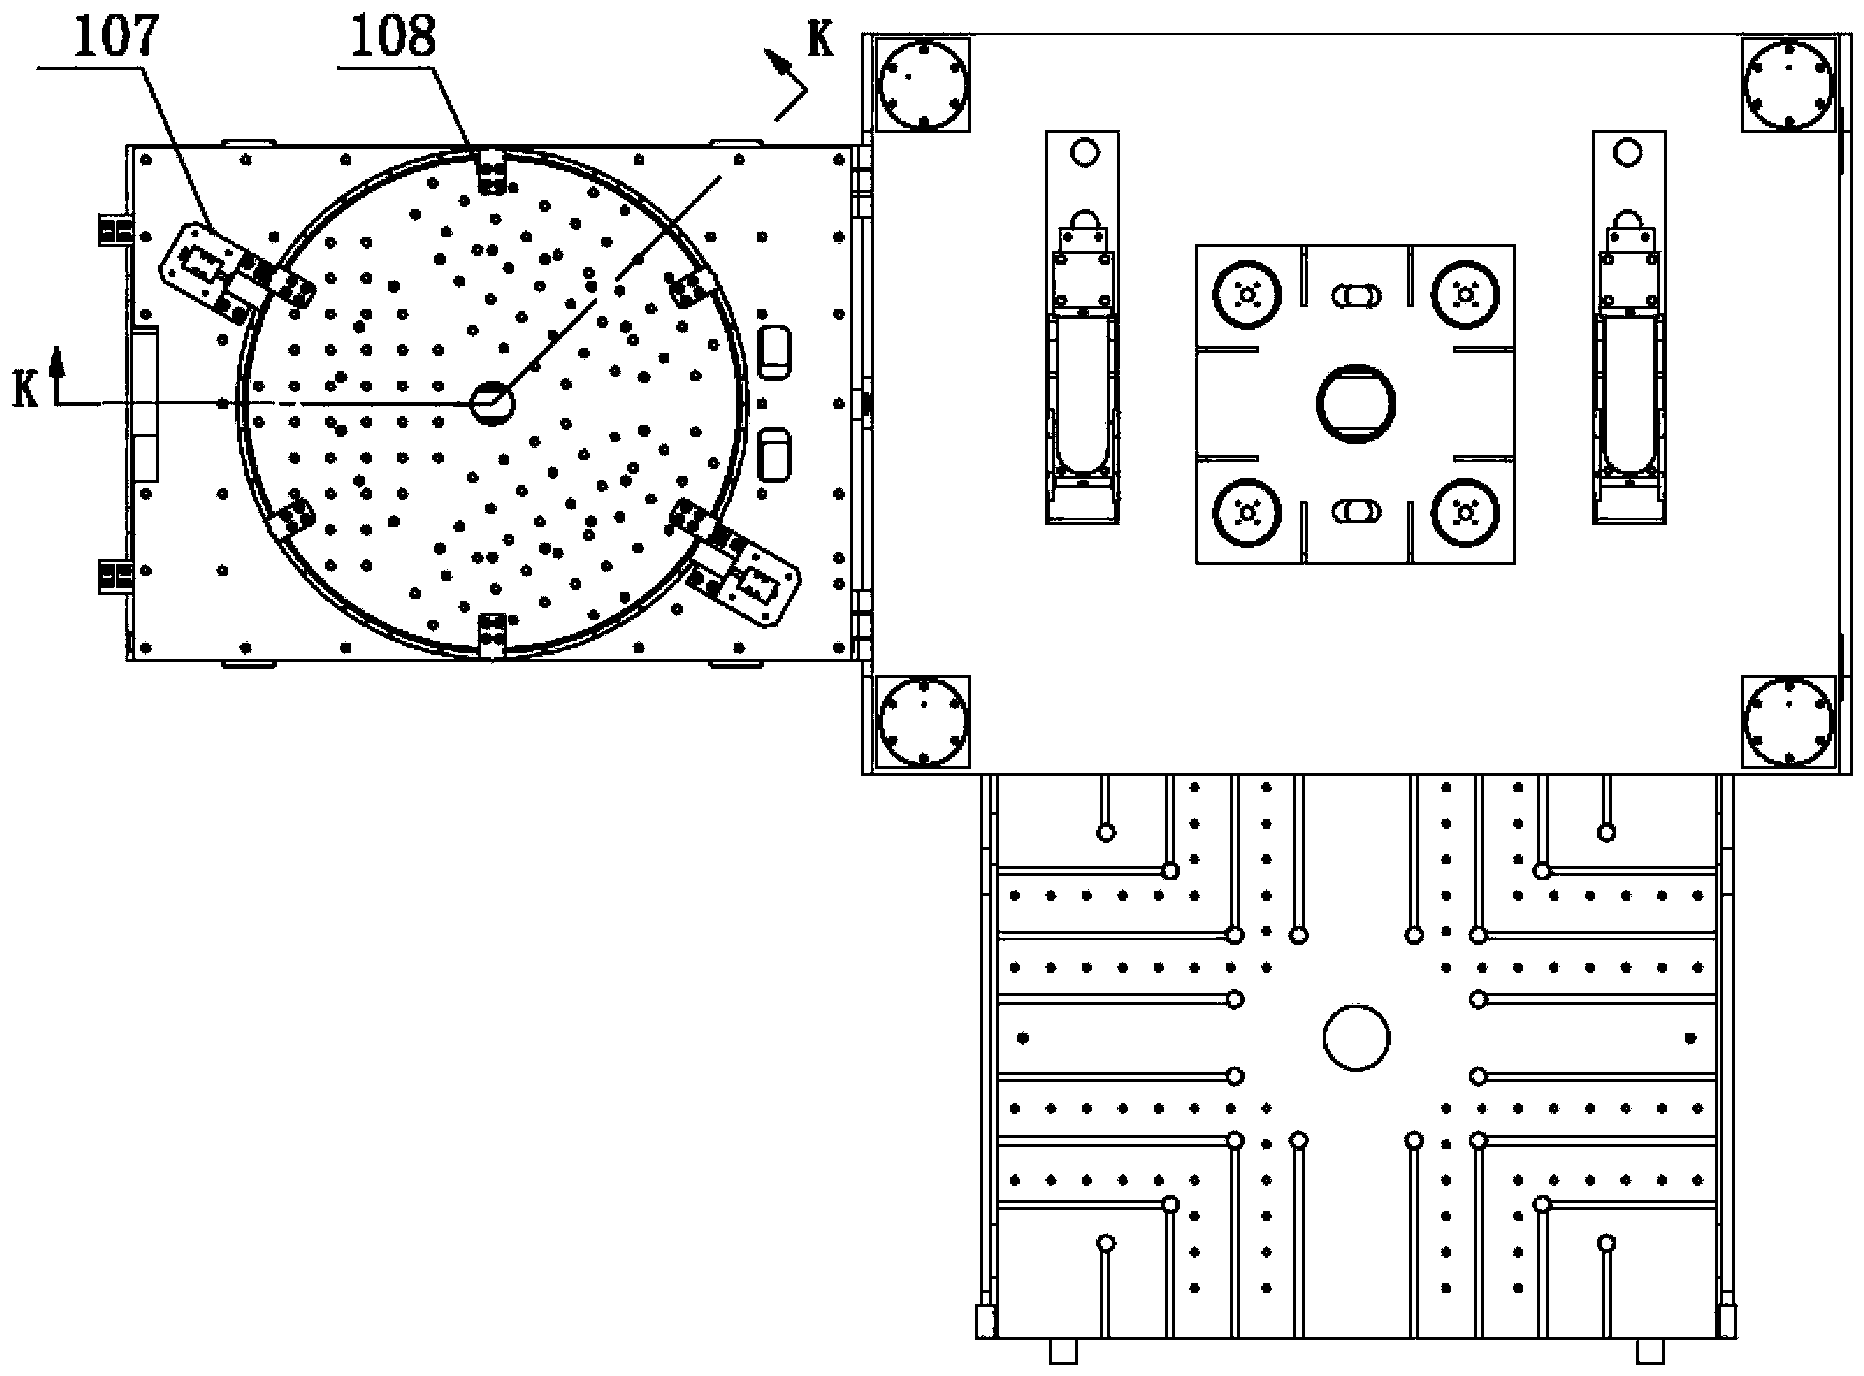 Multi-station variable-angle removing template for die spotting machine